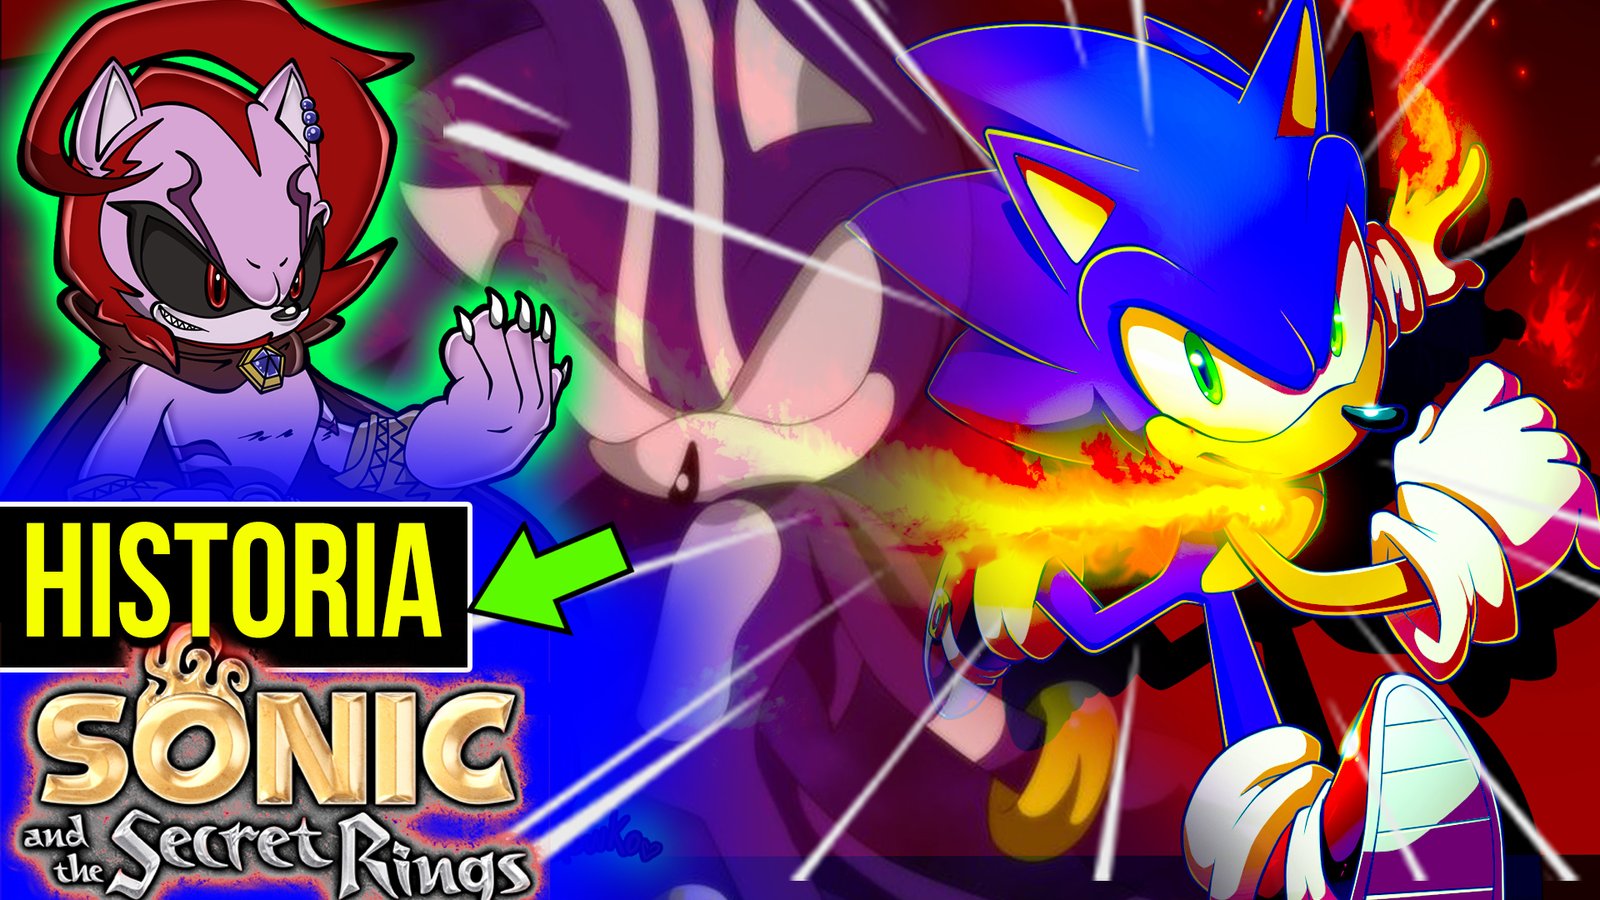 SONIC and the SECRET RINGS